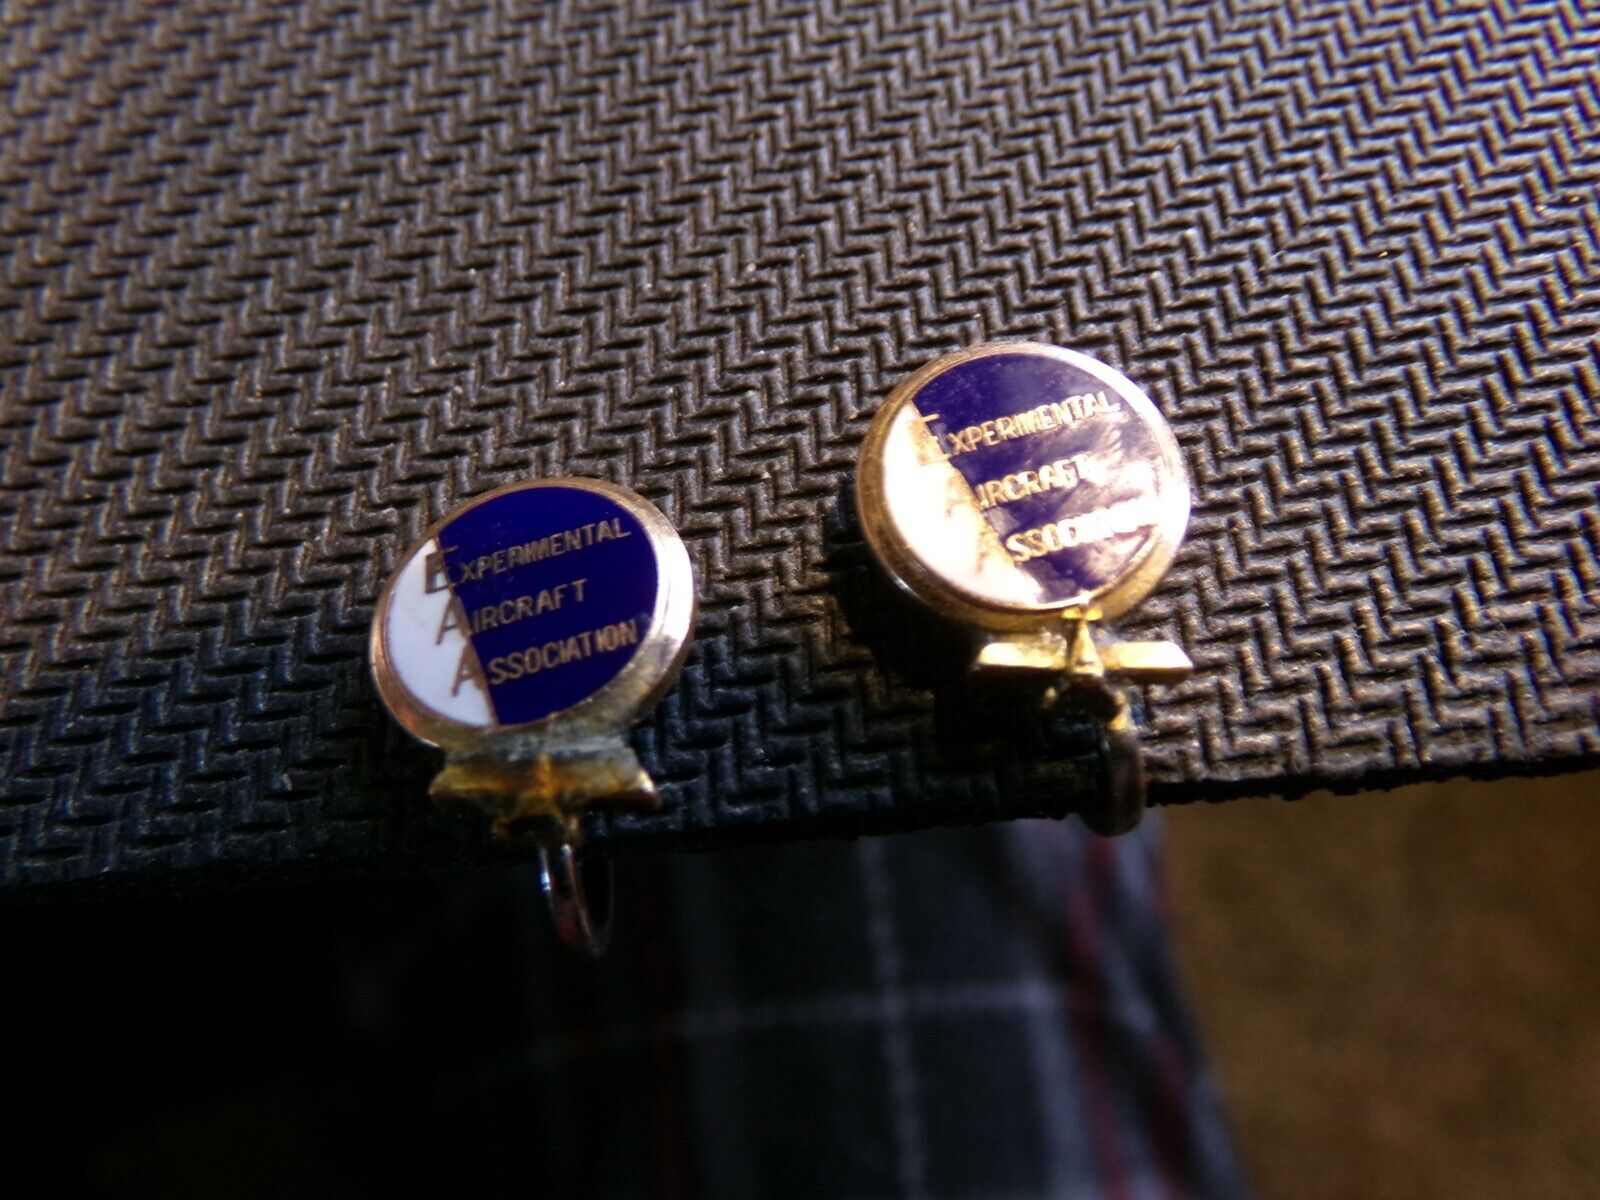 EAA (Experimental Aircraft Asso.) Earrings Purchased 1970 Convention Oshkosh, WI